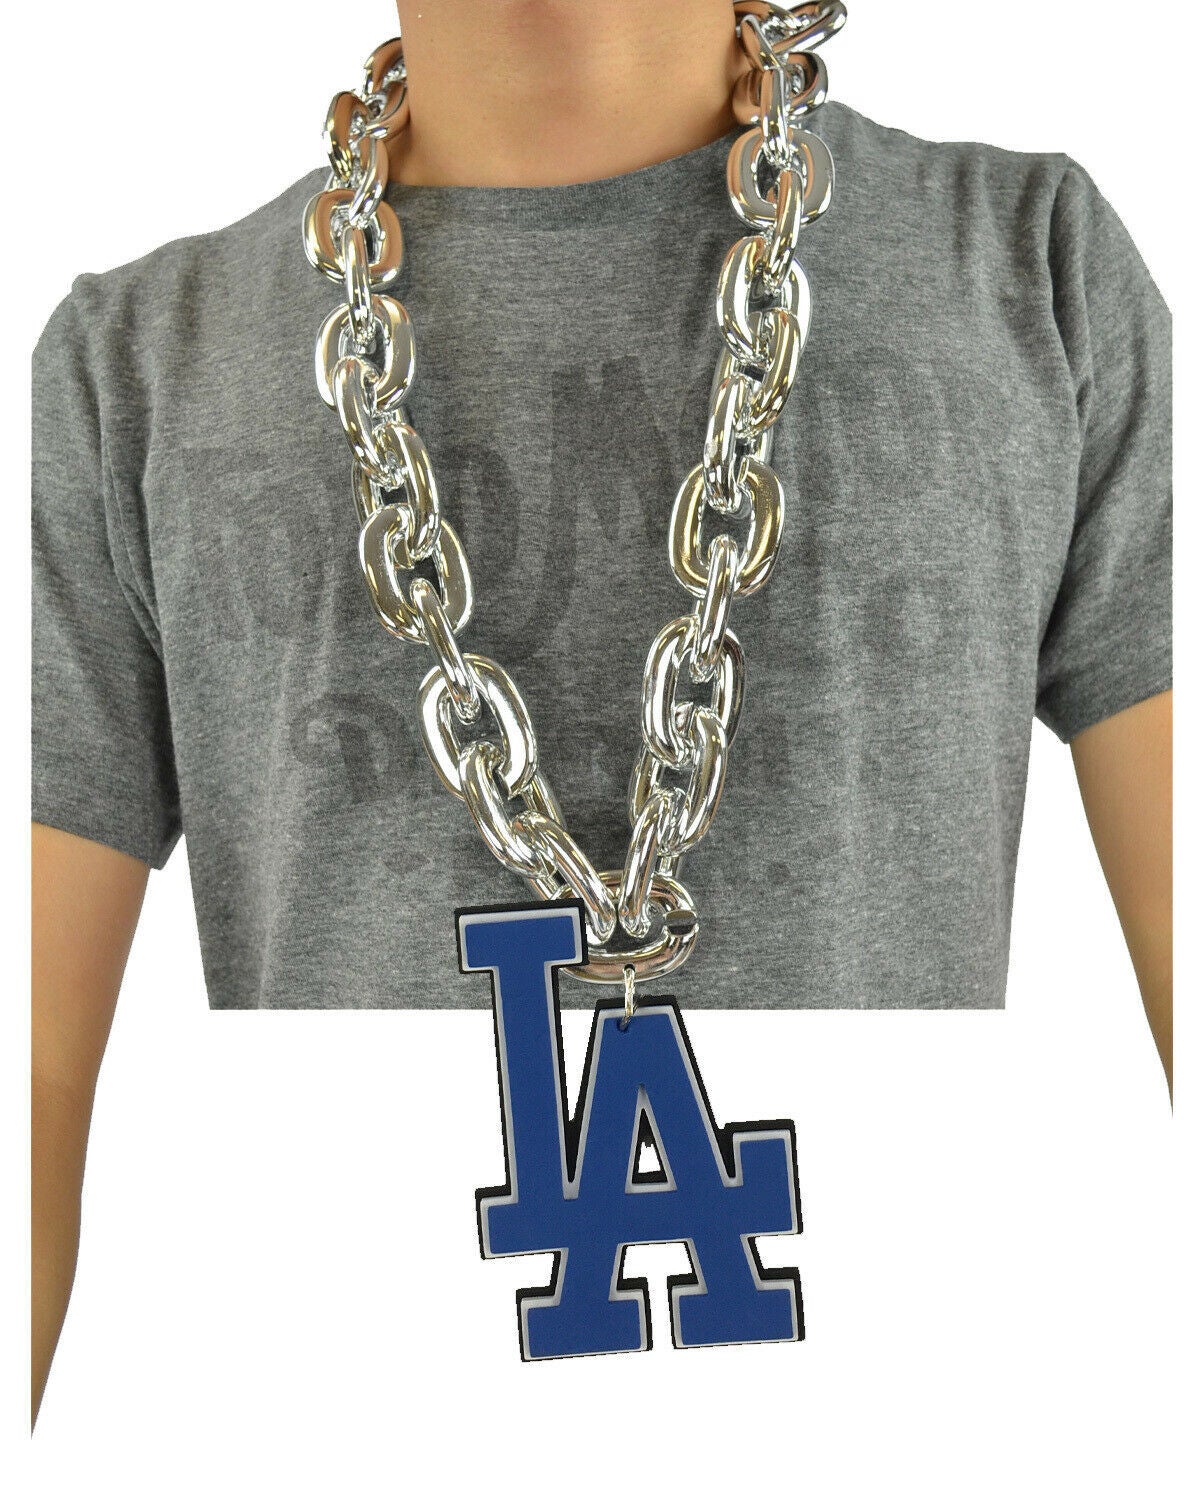 Los Angeles Angels 3D Fan Chain Necklace - Red Chain